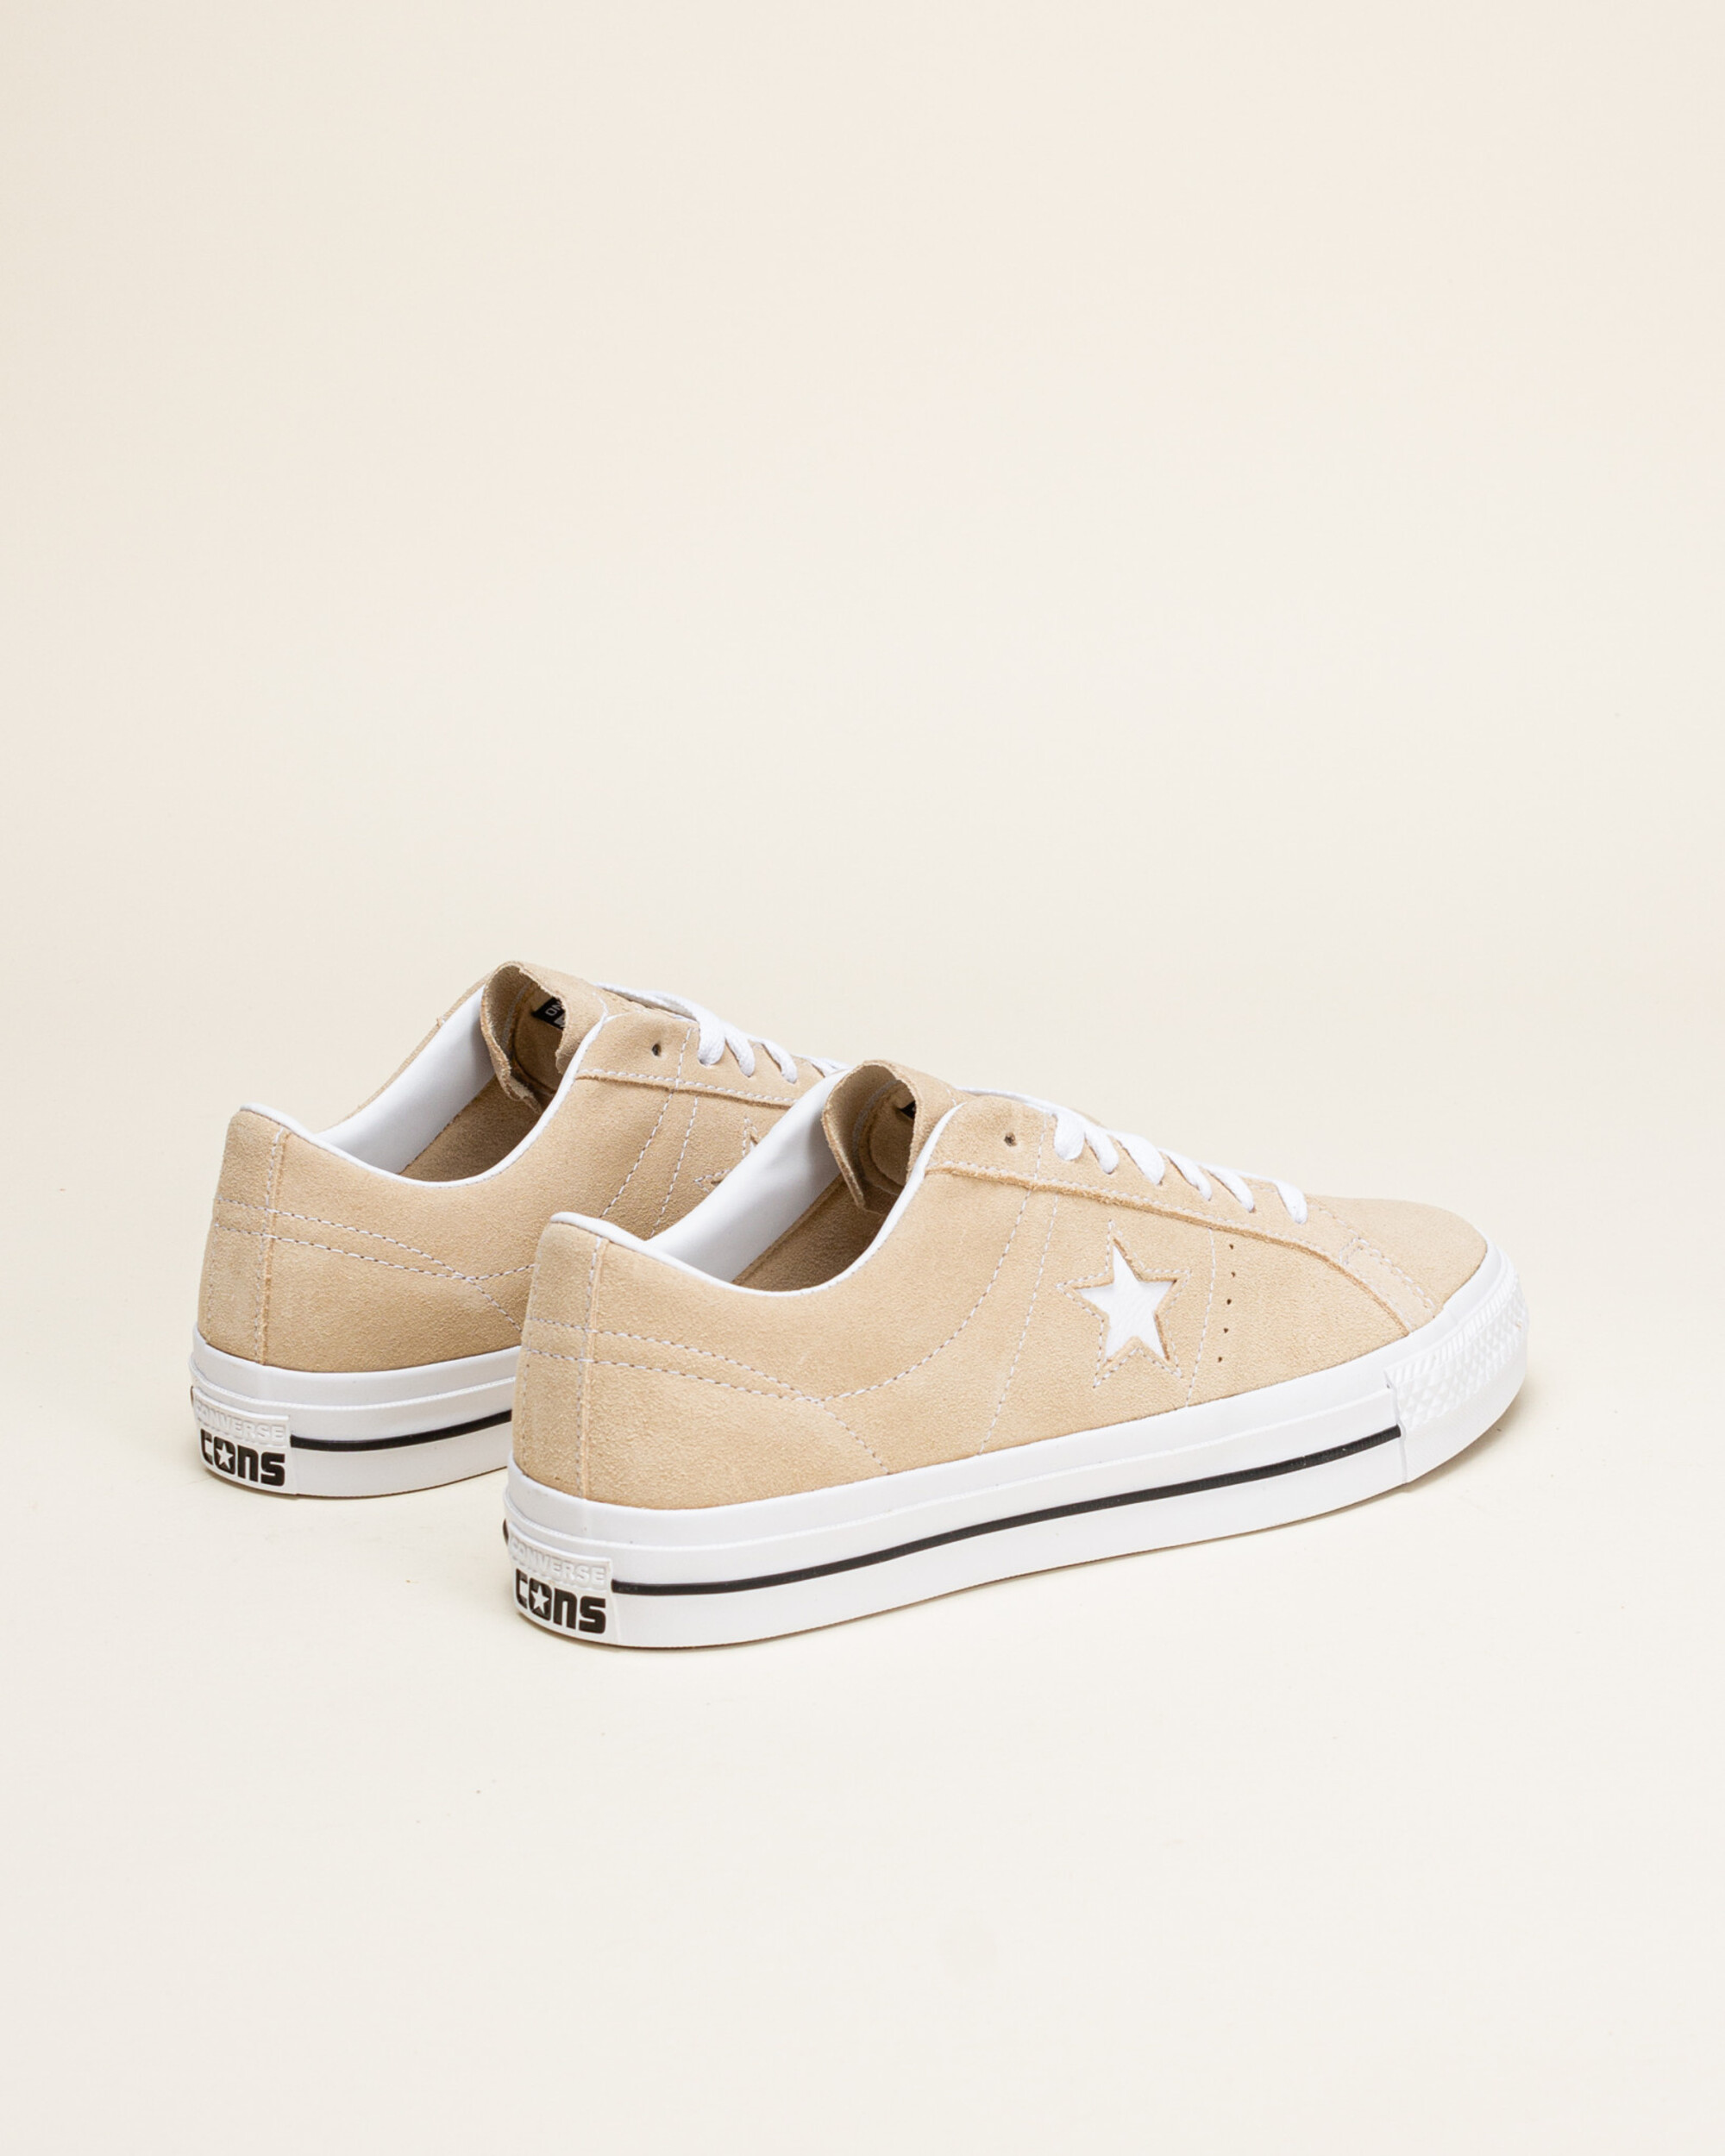 Converse Cons One Star Pro Suede - Oat Milk/White/Black